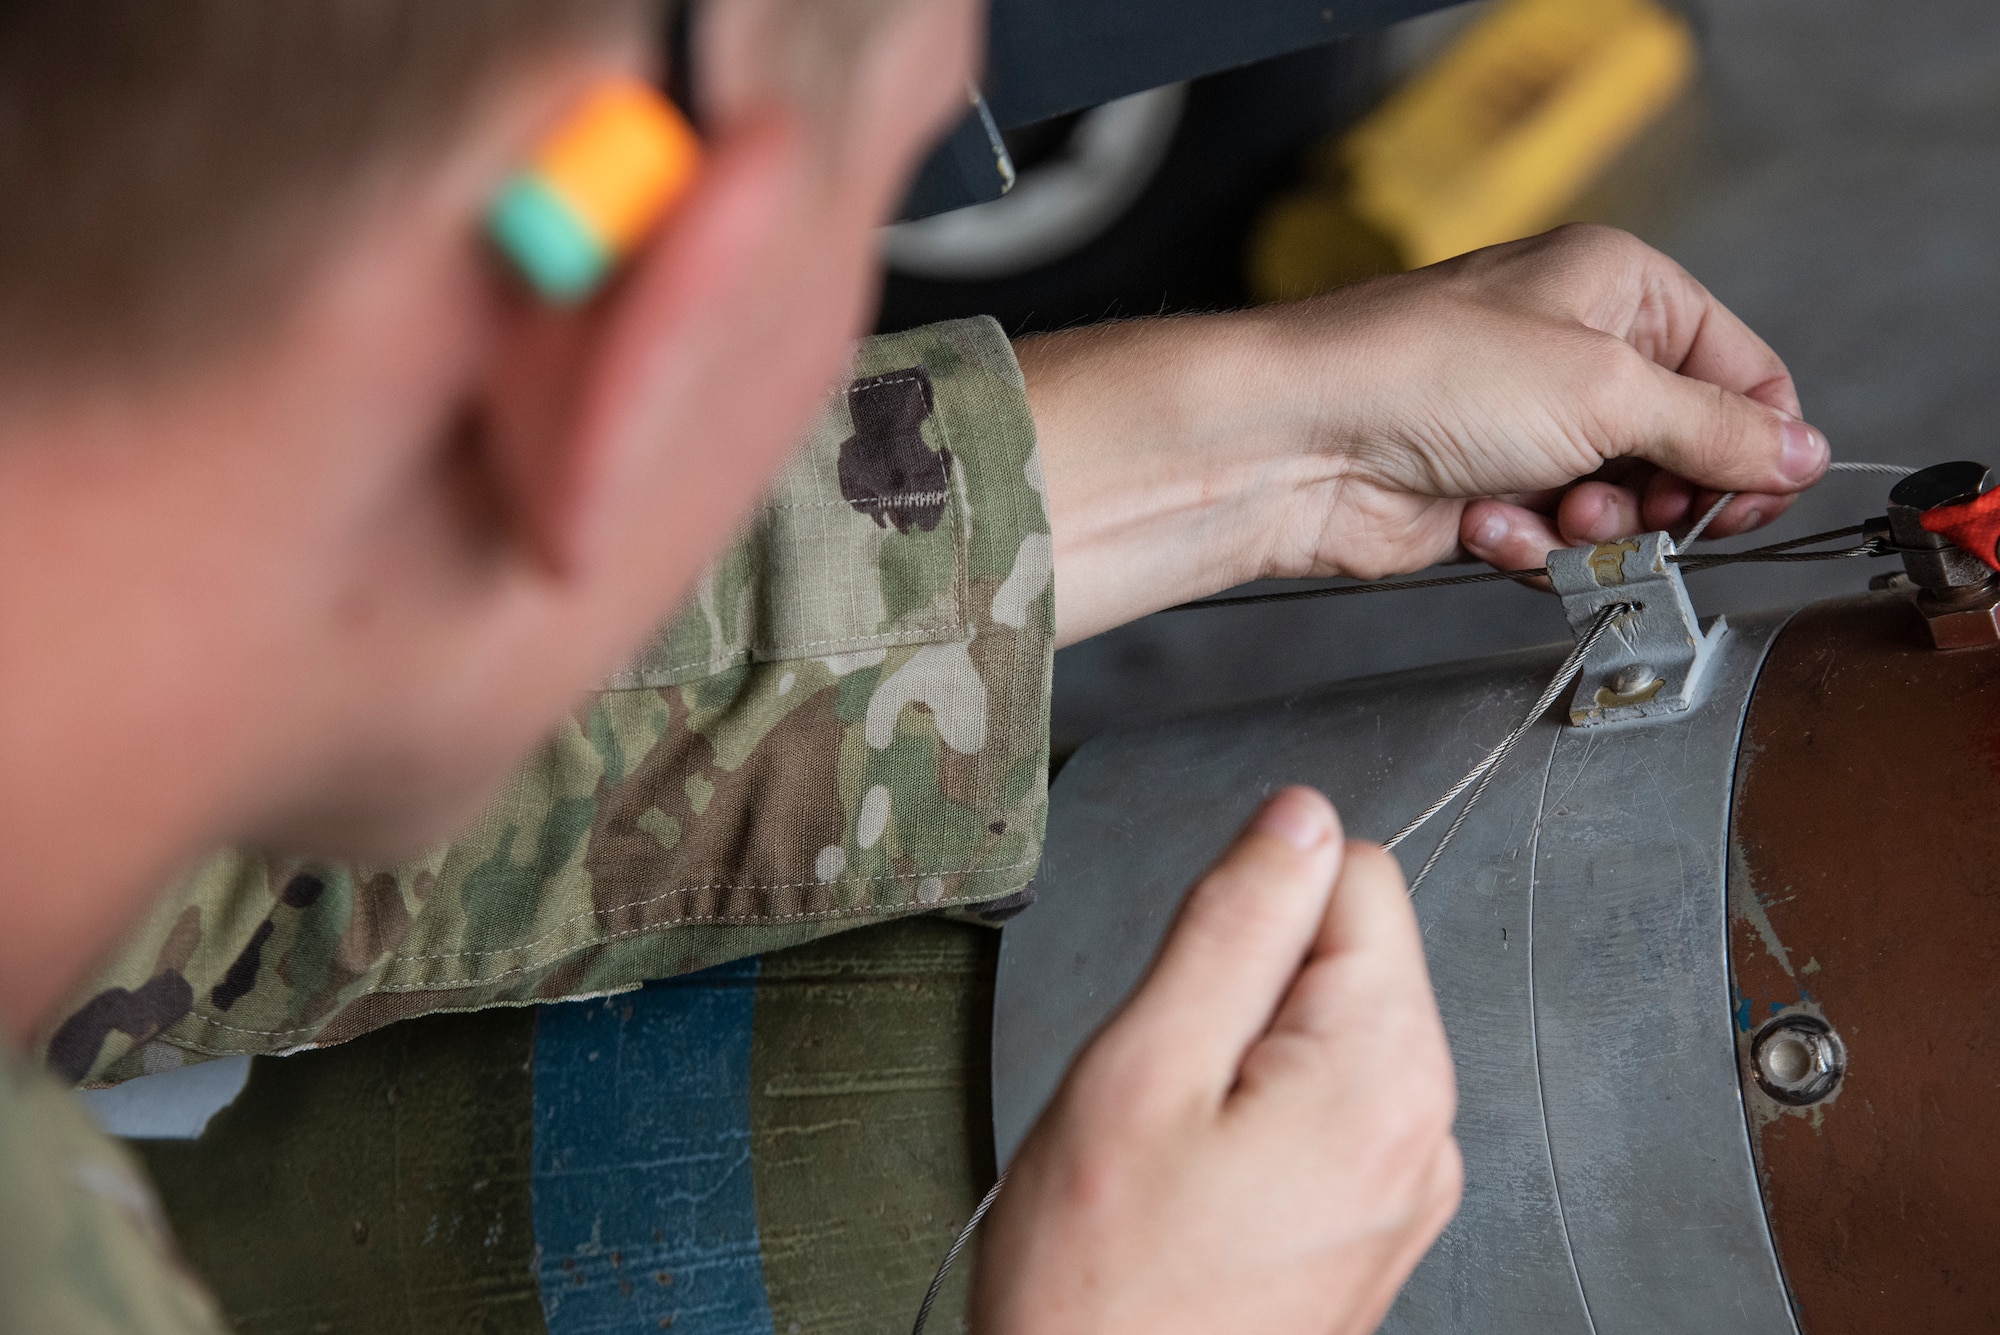 Airman 1st Class Isaac Bergfield, 335th Fighter Generation Squadron weapons load crew member, secures an unarmed practice [GBU-10 Paveway II] munition onto a F-15E Strike Eagle.